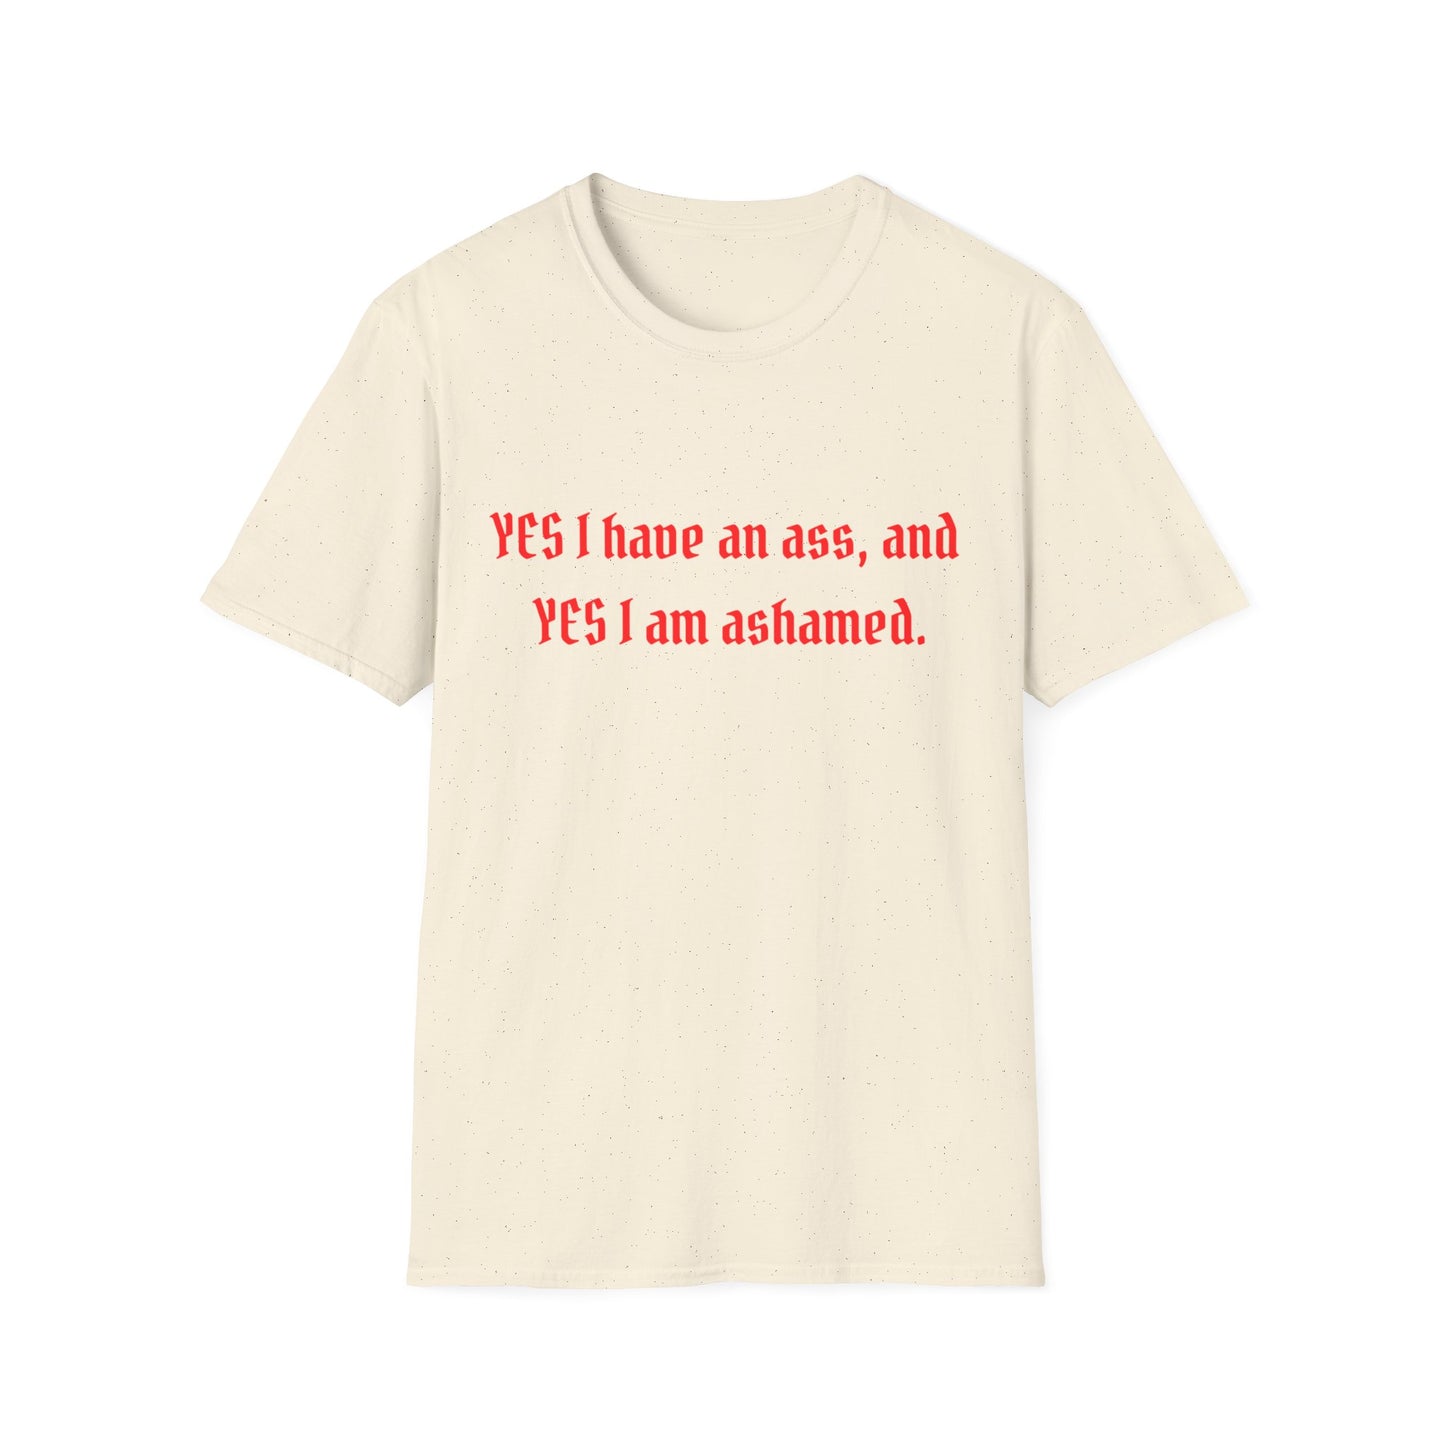 "YES I Have An Ass, And YES I Am Ashamed" Shirt